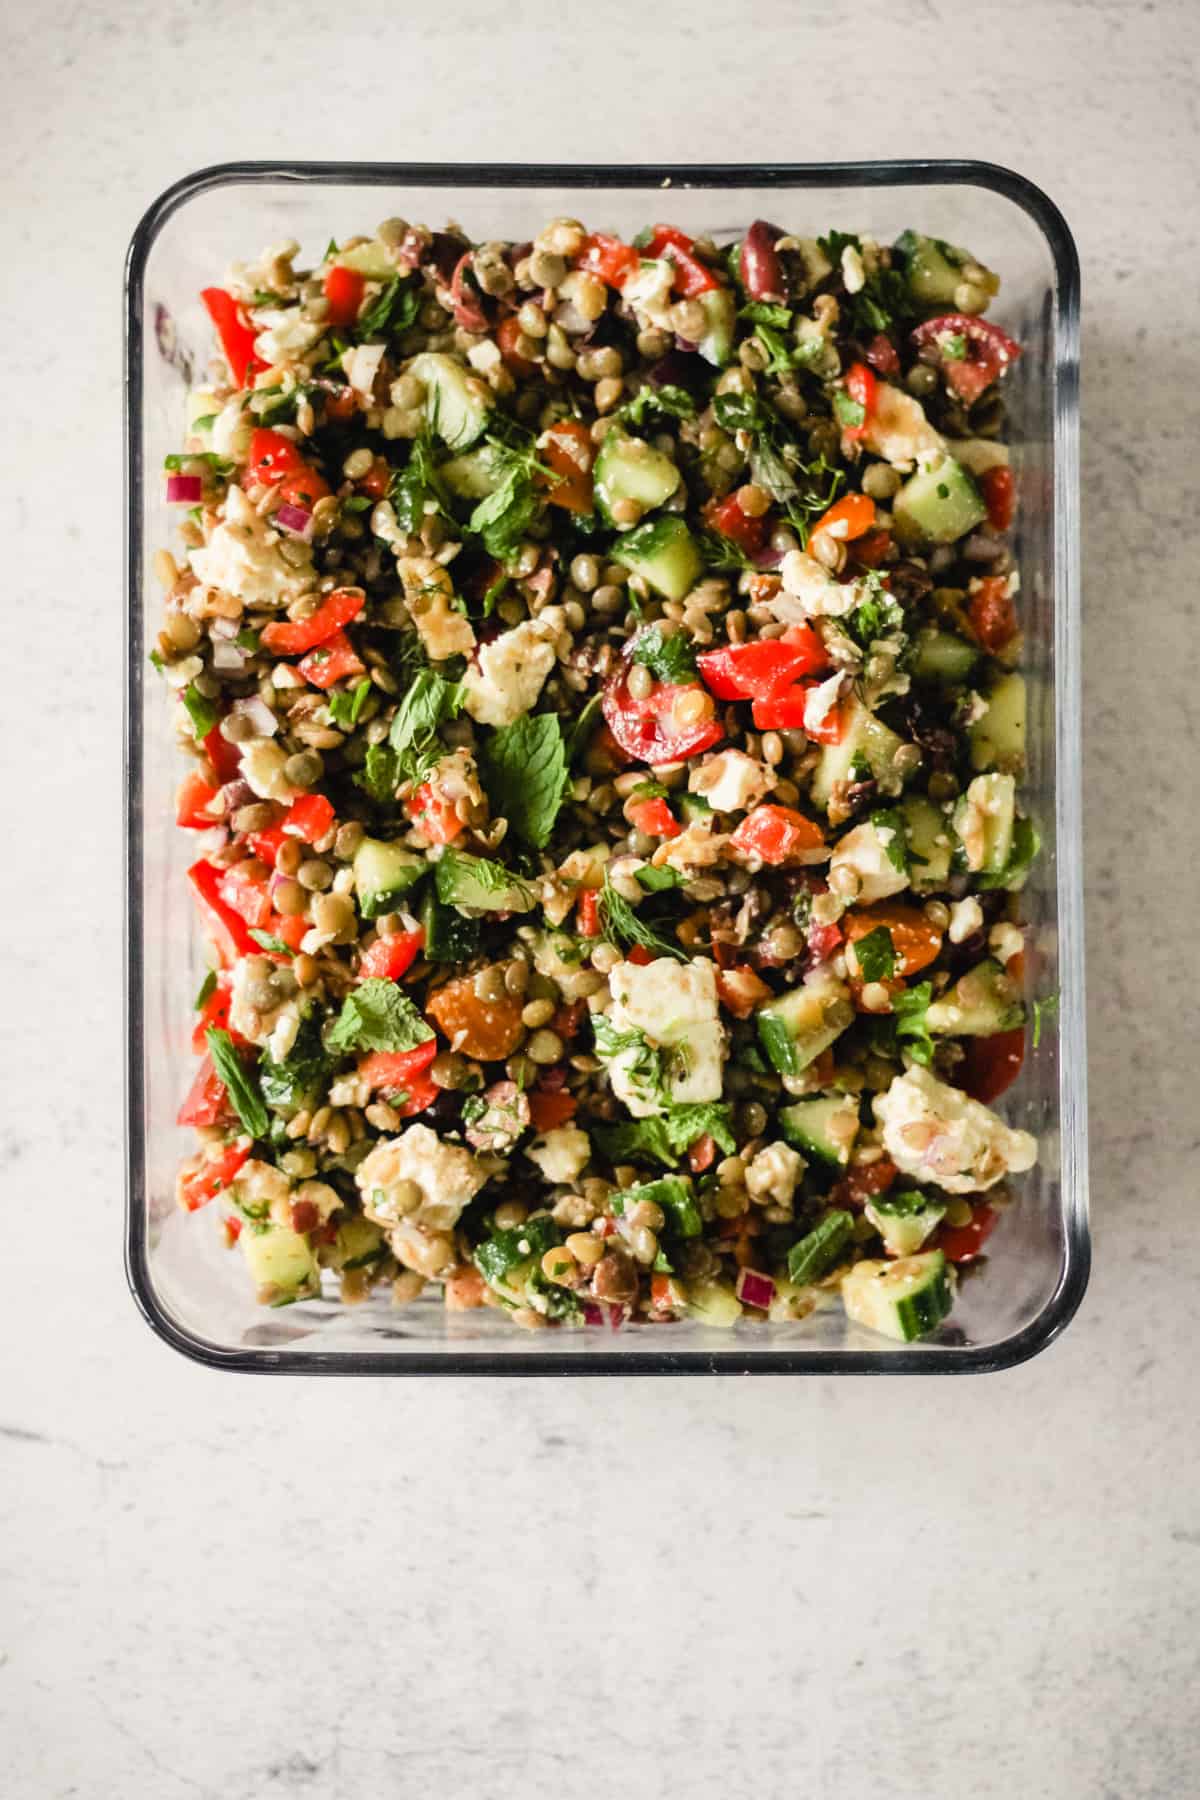 Lentil salad in a meal prep container.